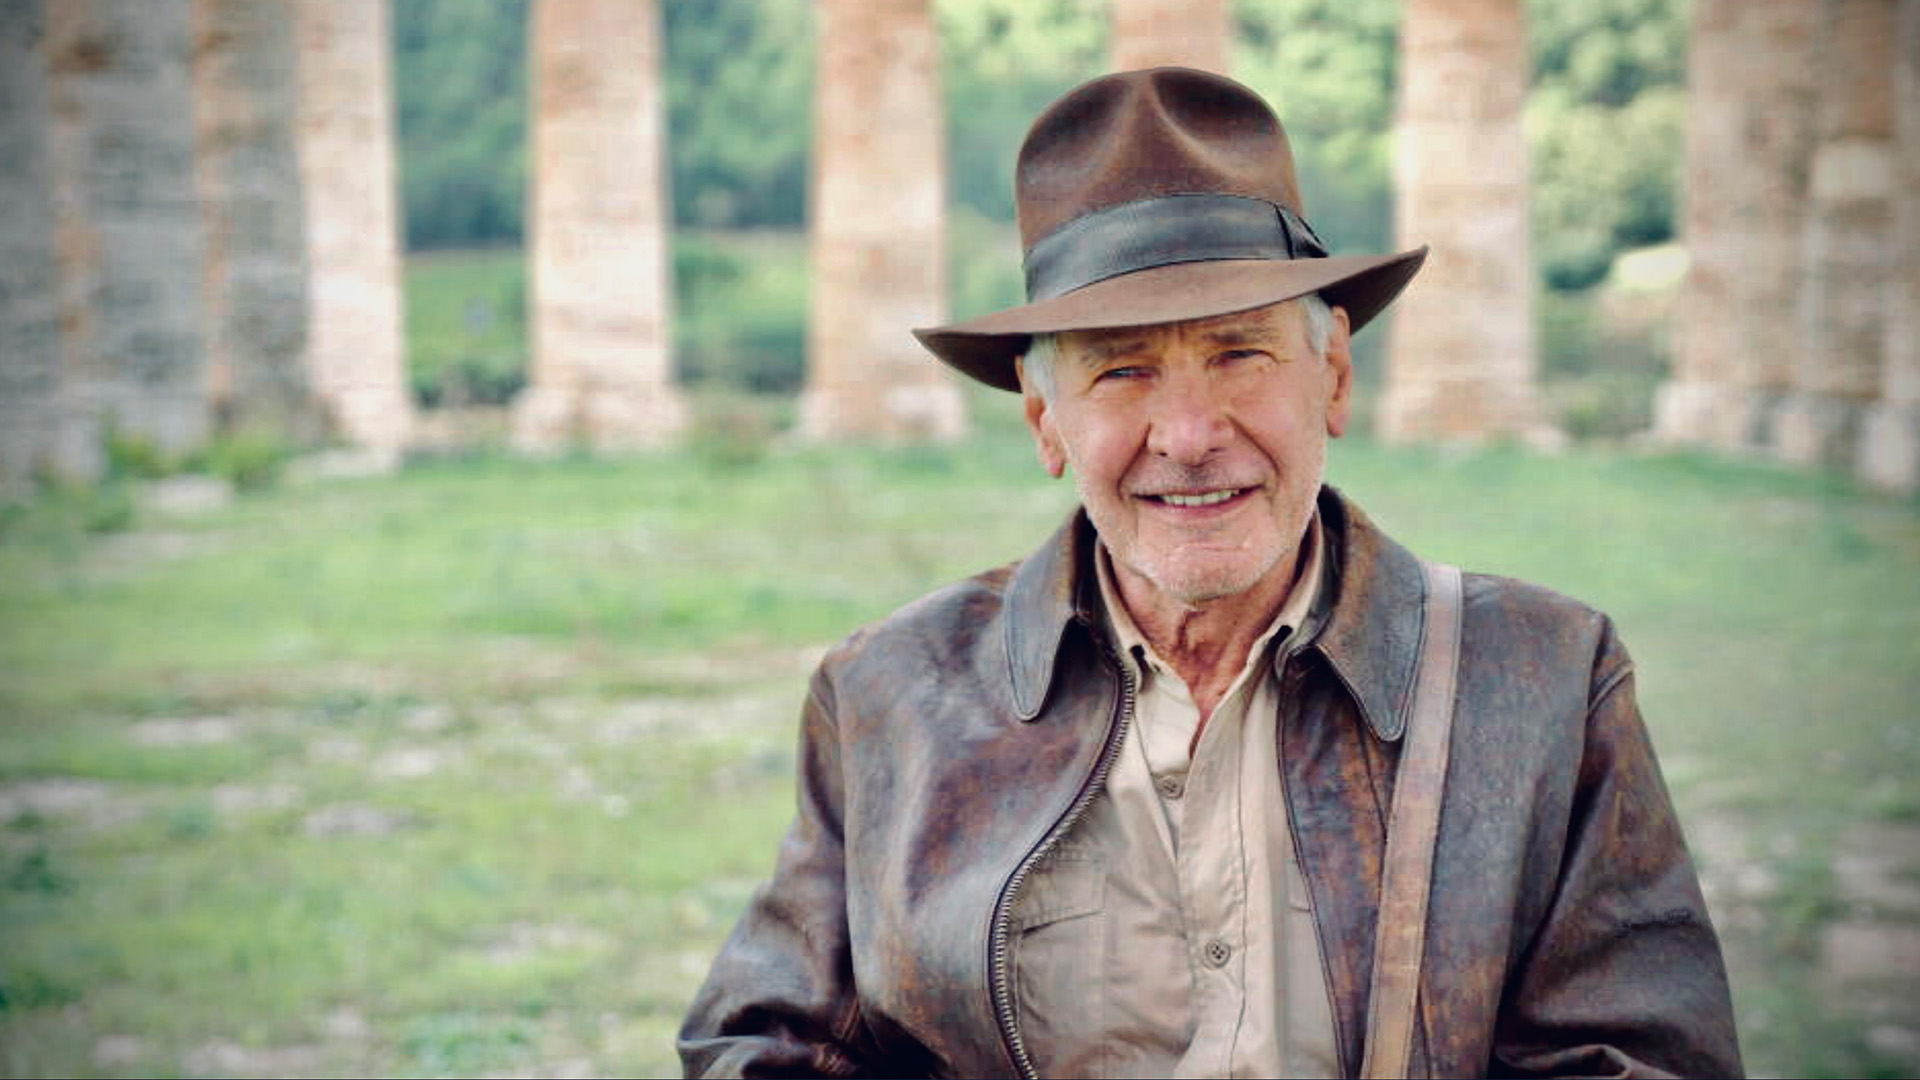 Harrison Ford interviewed on location in Sicily.